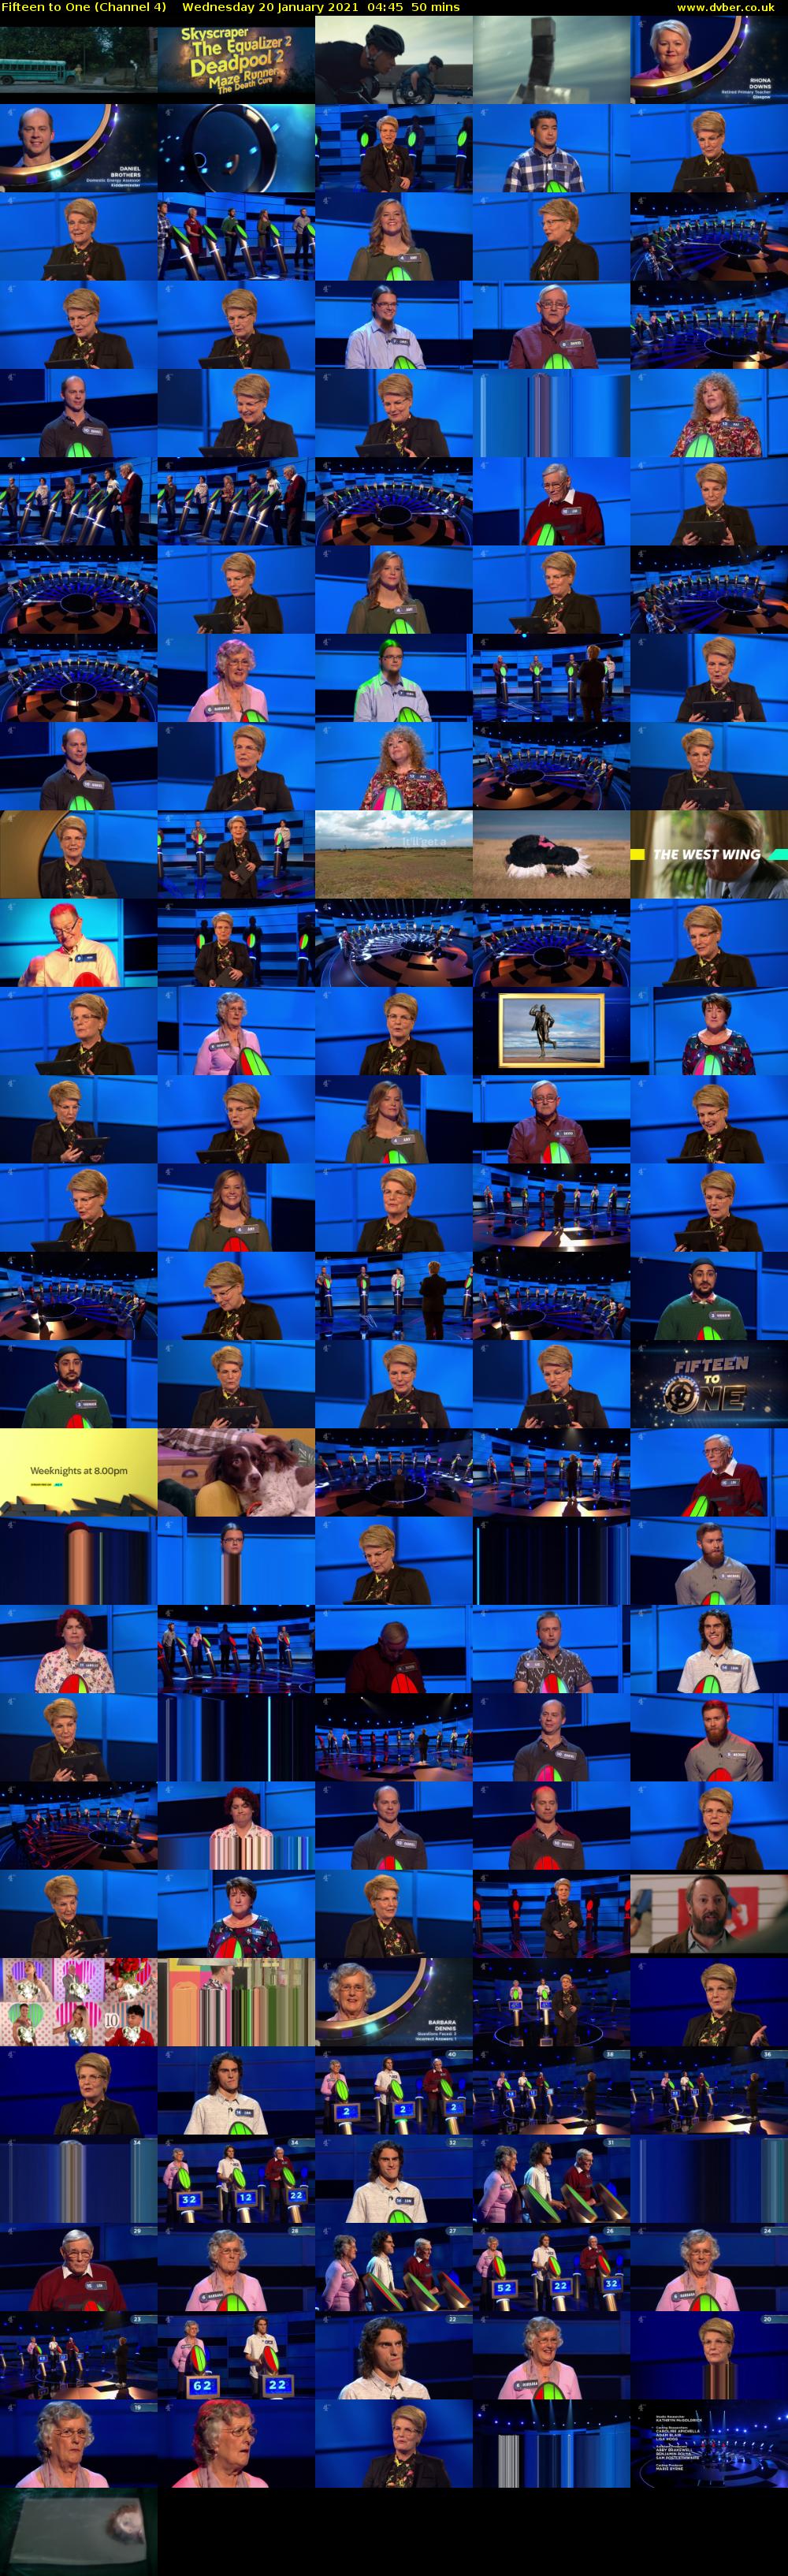 Fifteen to One (Channel 4) Wednesday 20 January 2021 04:45 - 05:35